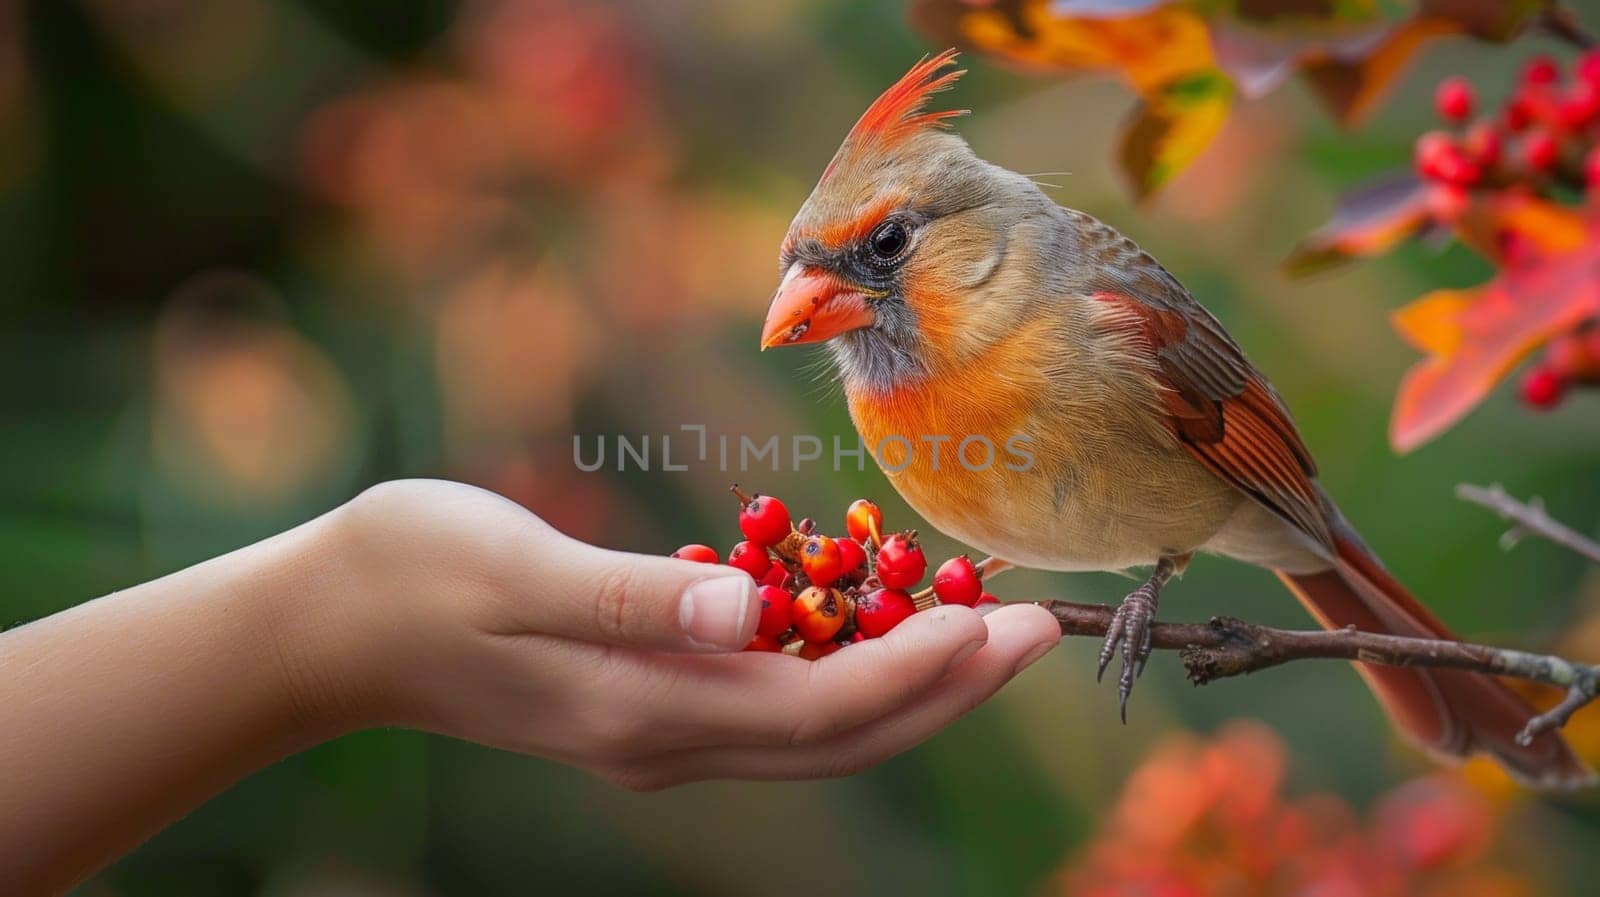 A bird perched on a branch of red berries being held out by hand, AI by starush